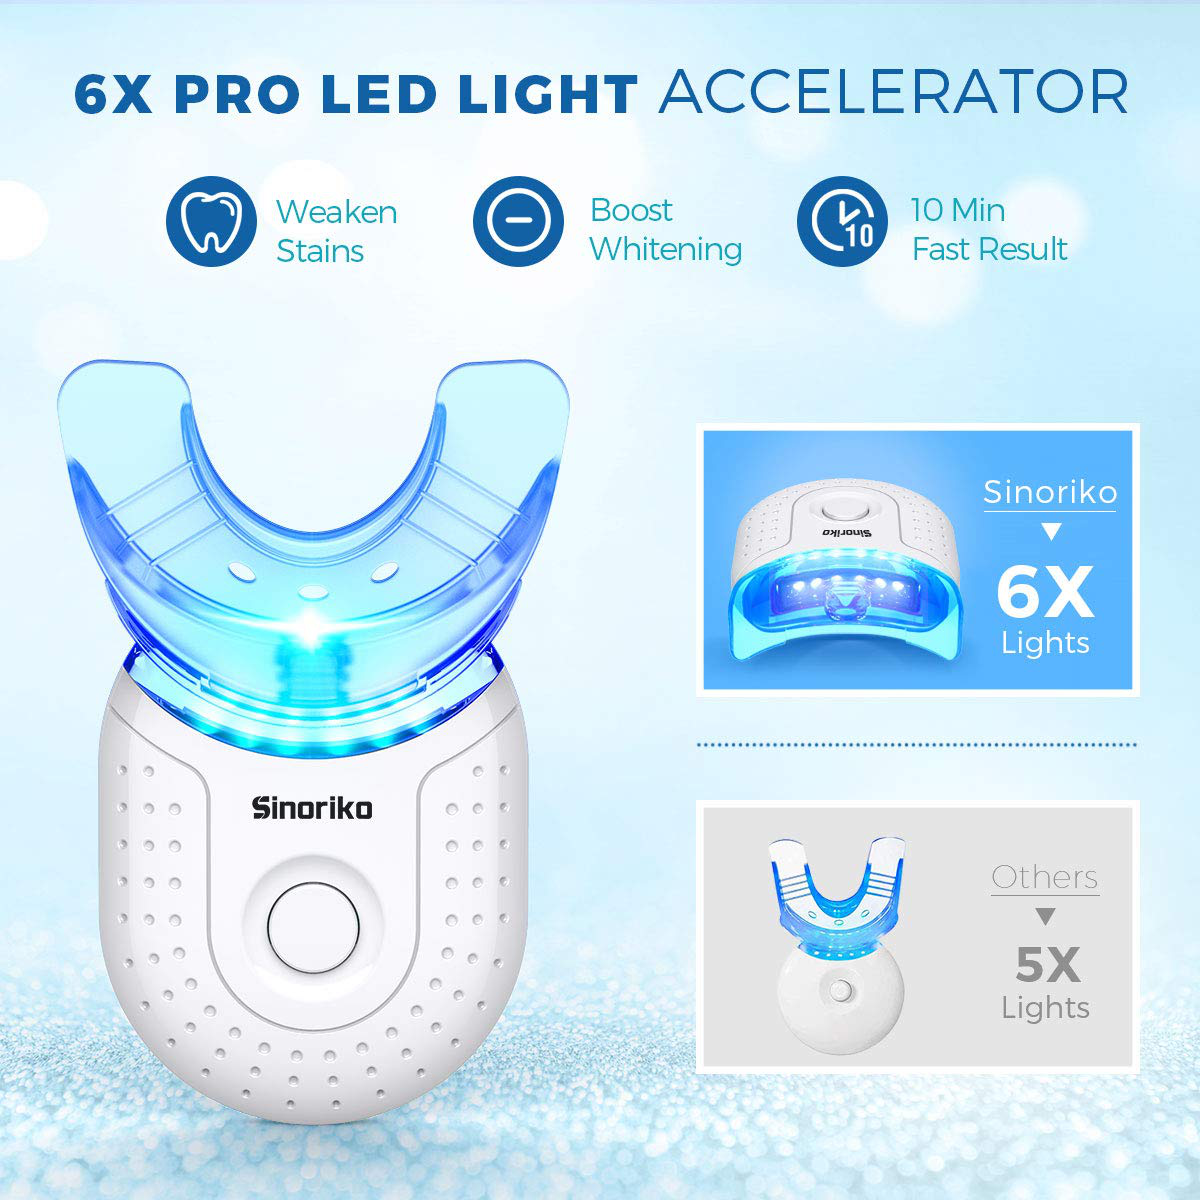 SINORIKO Teeth Whitening Kit with 6X LED Light for Sensitive Teeth 10 Min Fast Result, 3 Carbamide Peroxide Whitening Gel 1 Remineralizing Gel, Mouth Tray with Case, Home Teeth Whitener